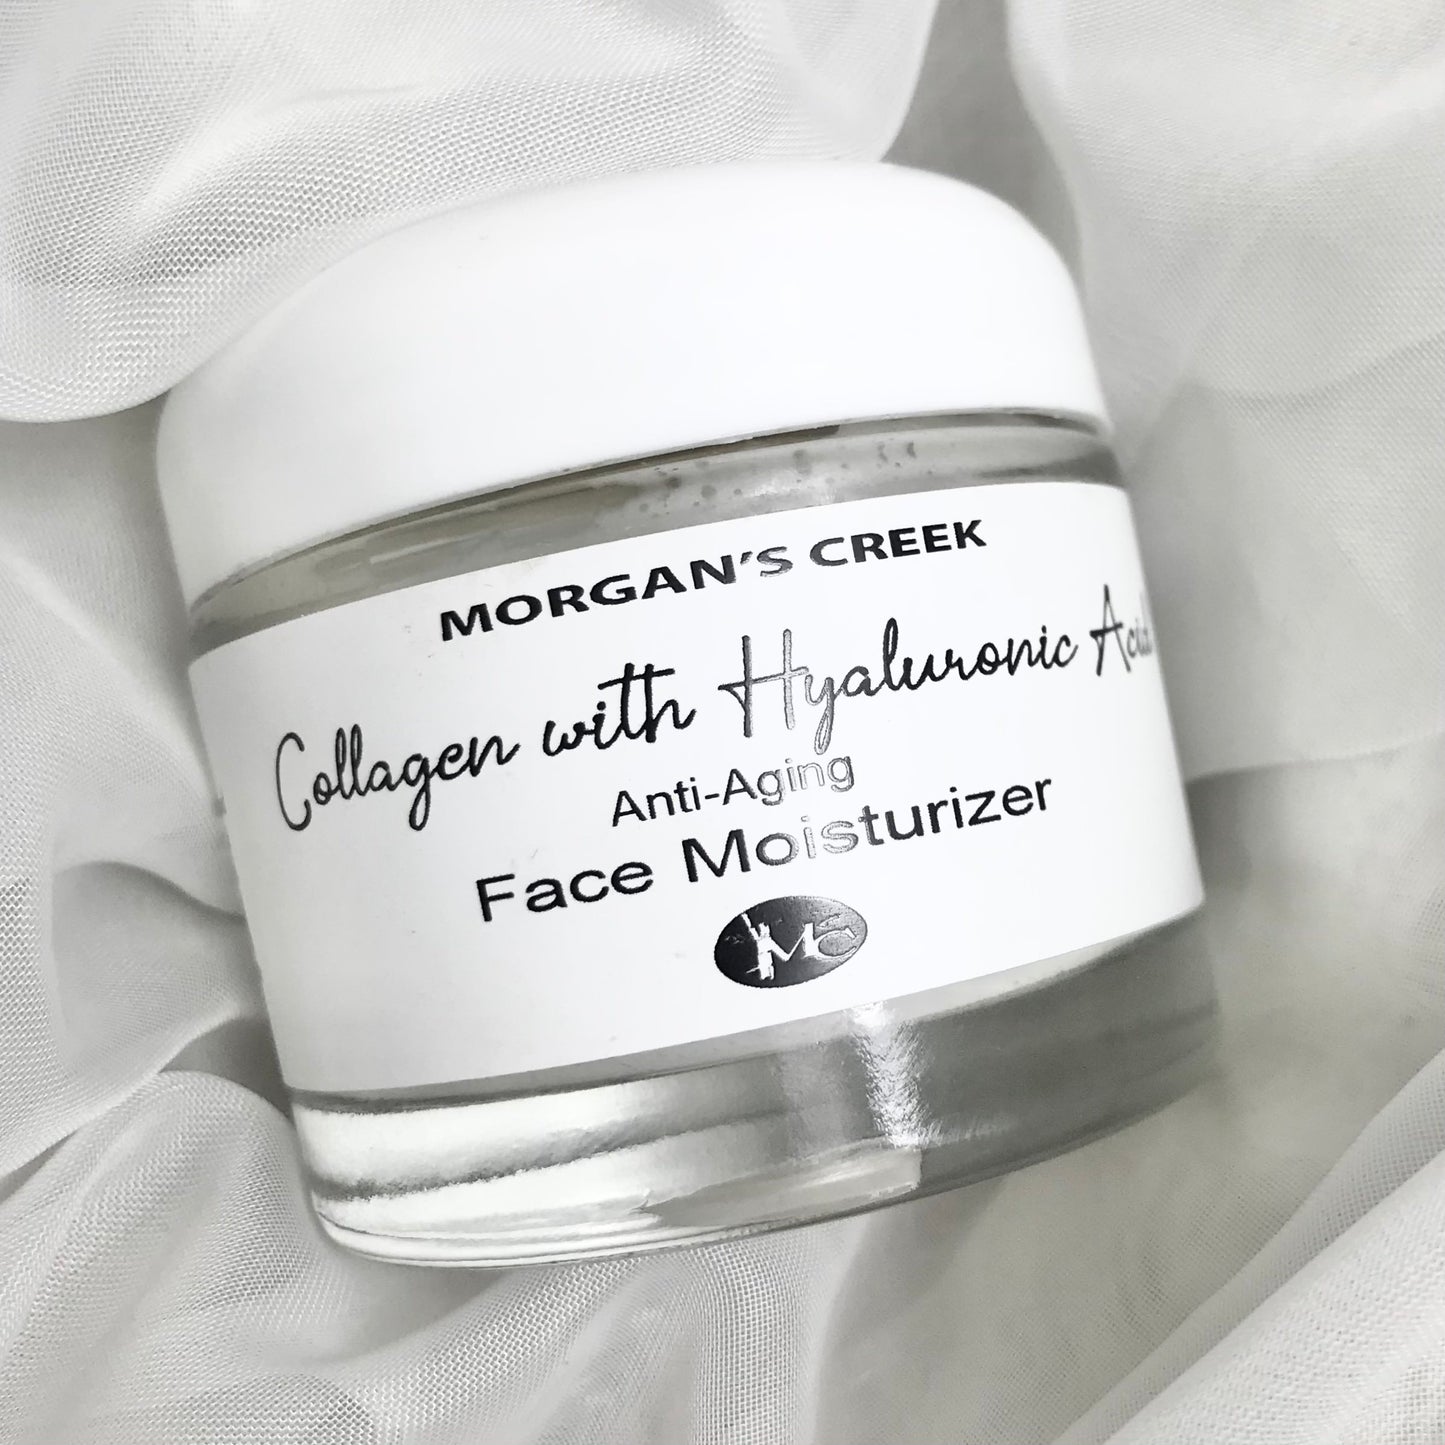 Collagen with Hyaluronic Acid Face Moisturizer (Anti Aging)